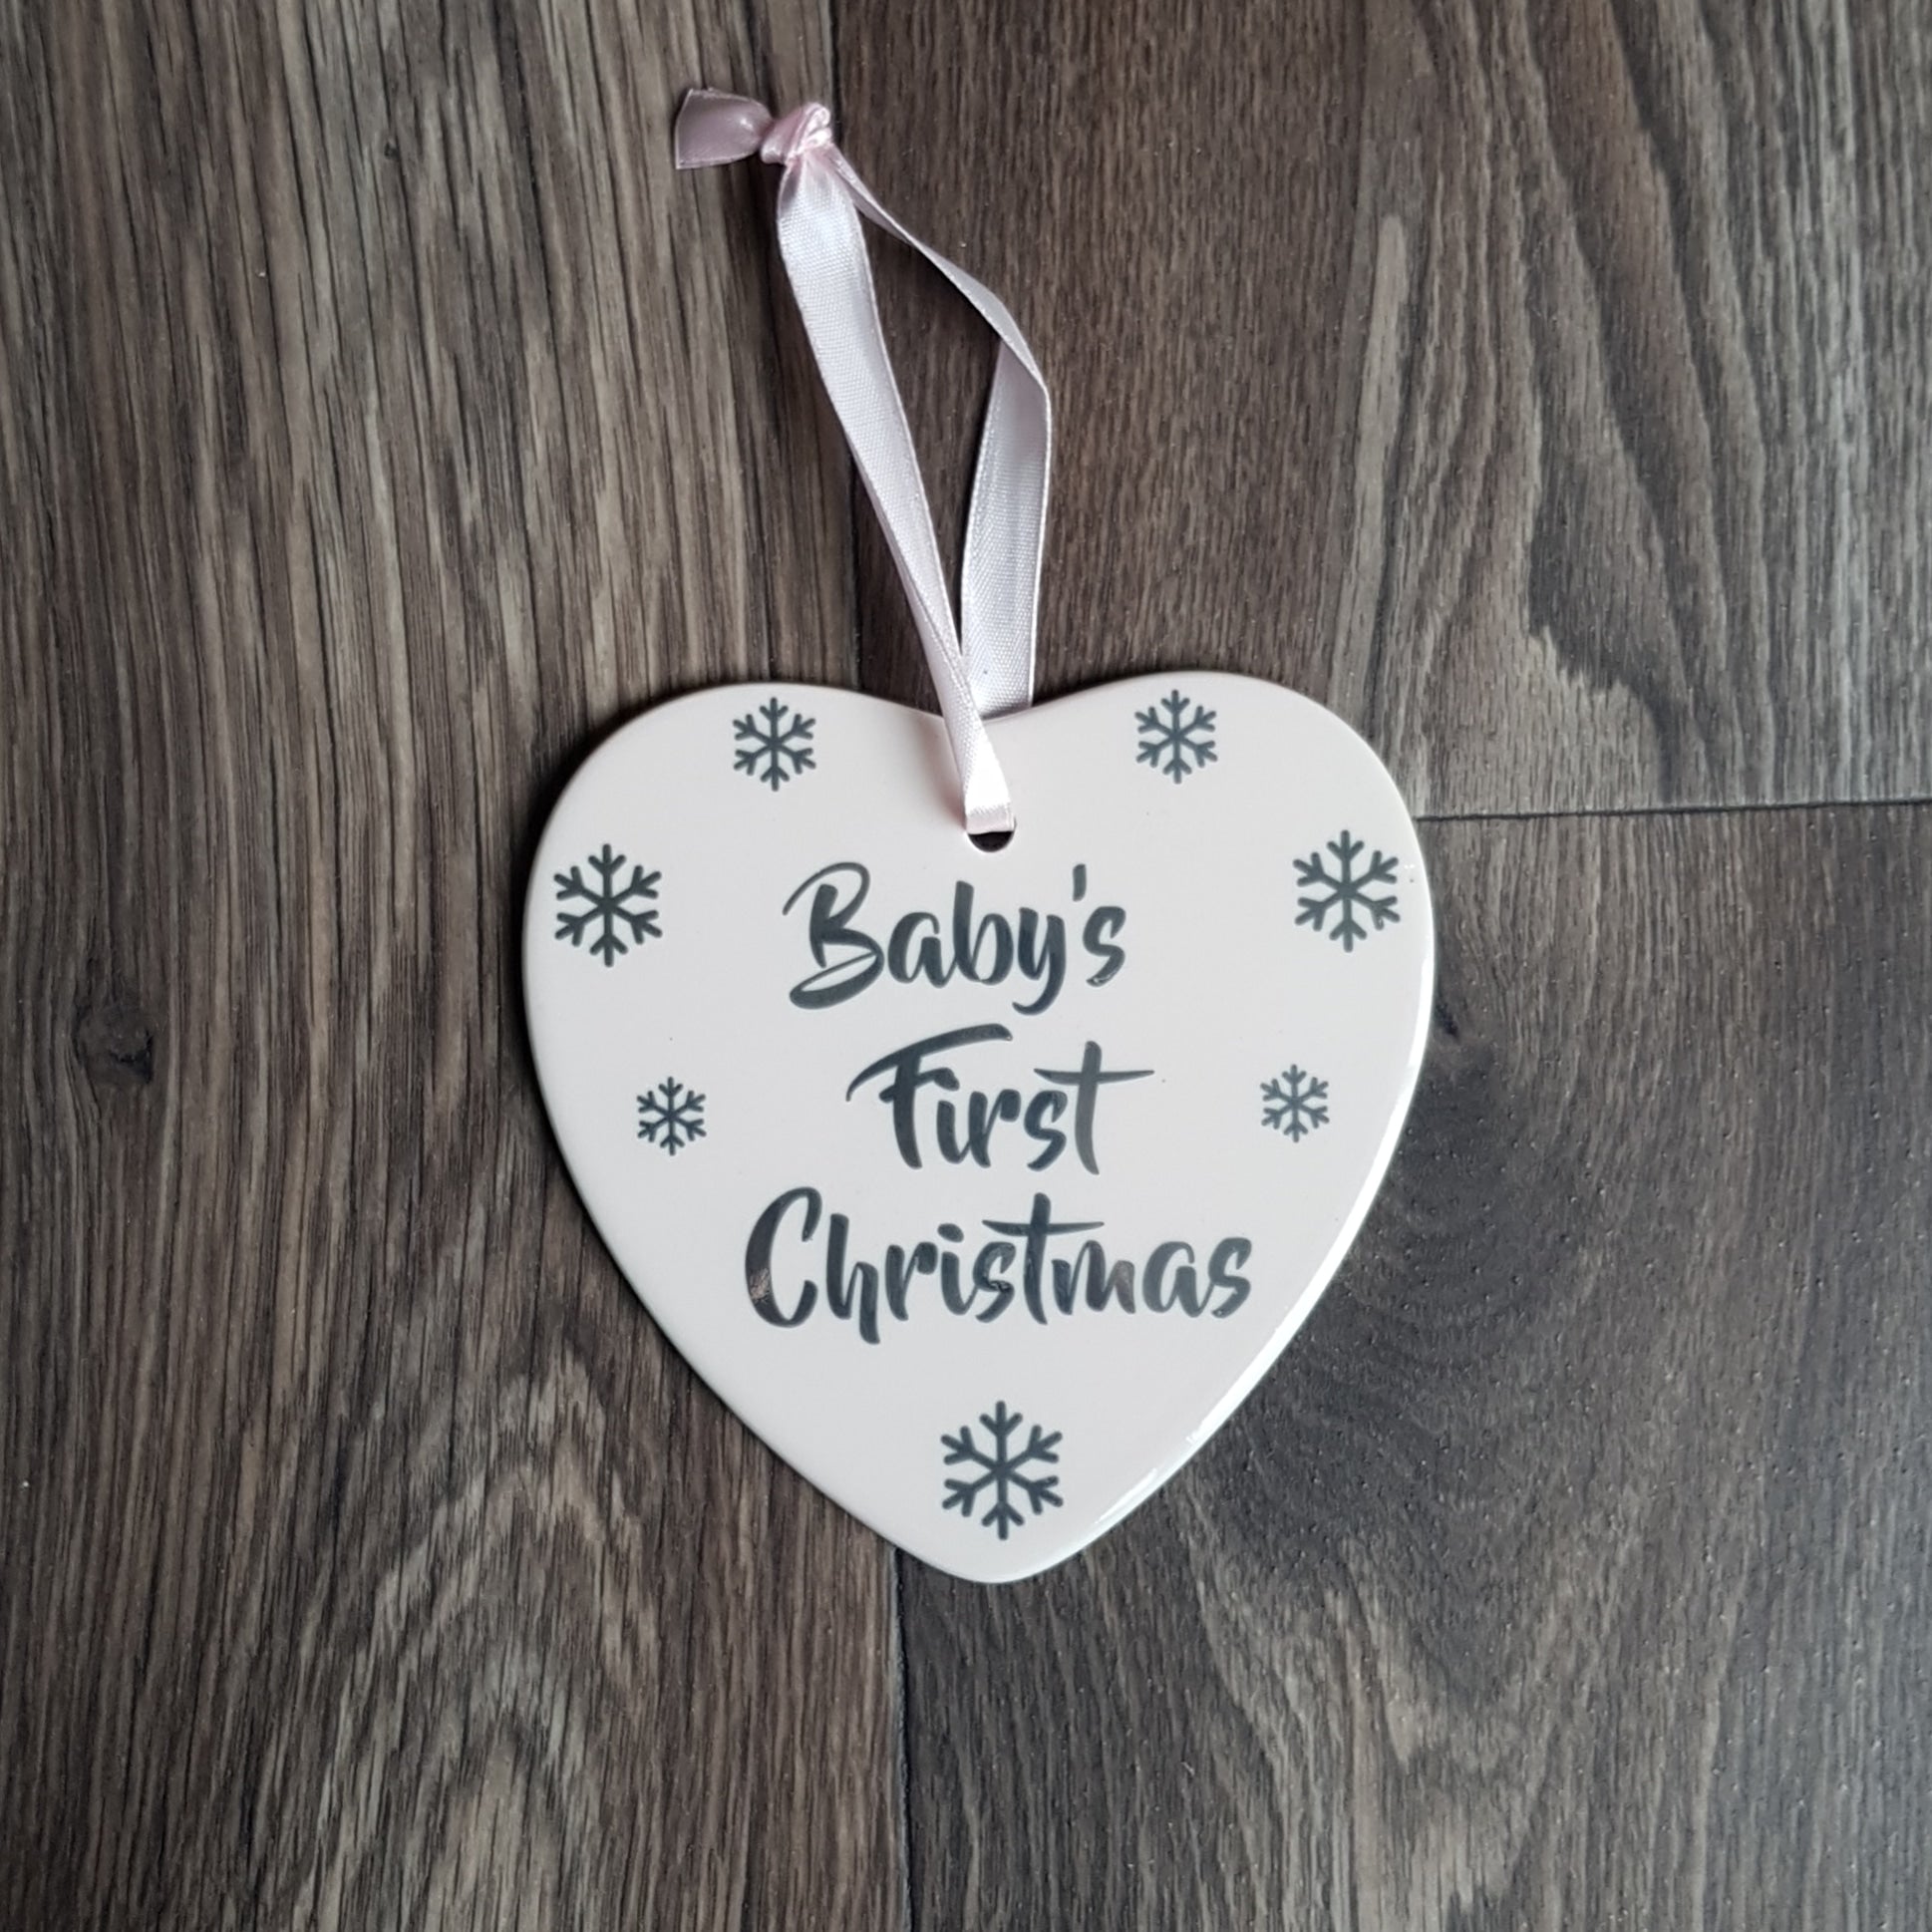 Girls Pink Babys 1st / First Christmas plaque / decoration - The Future Image